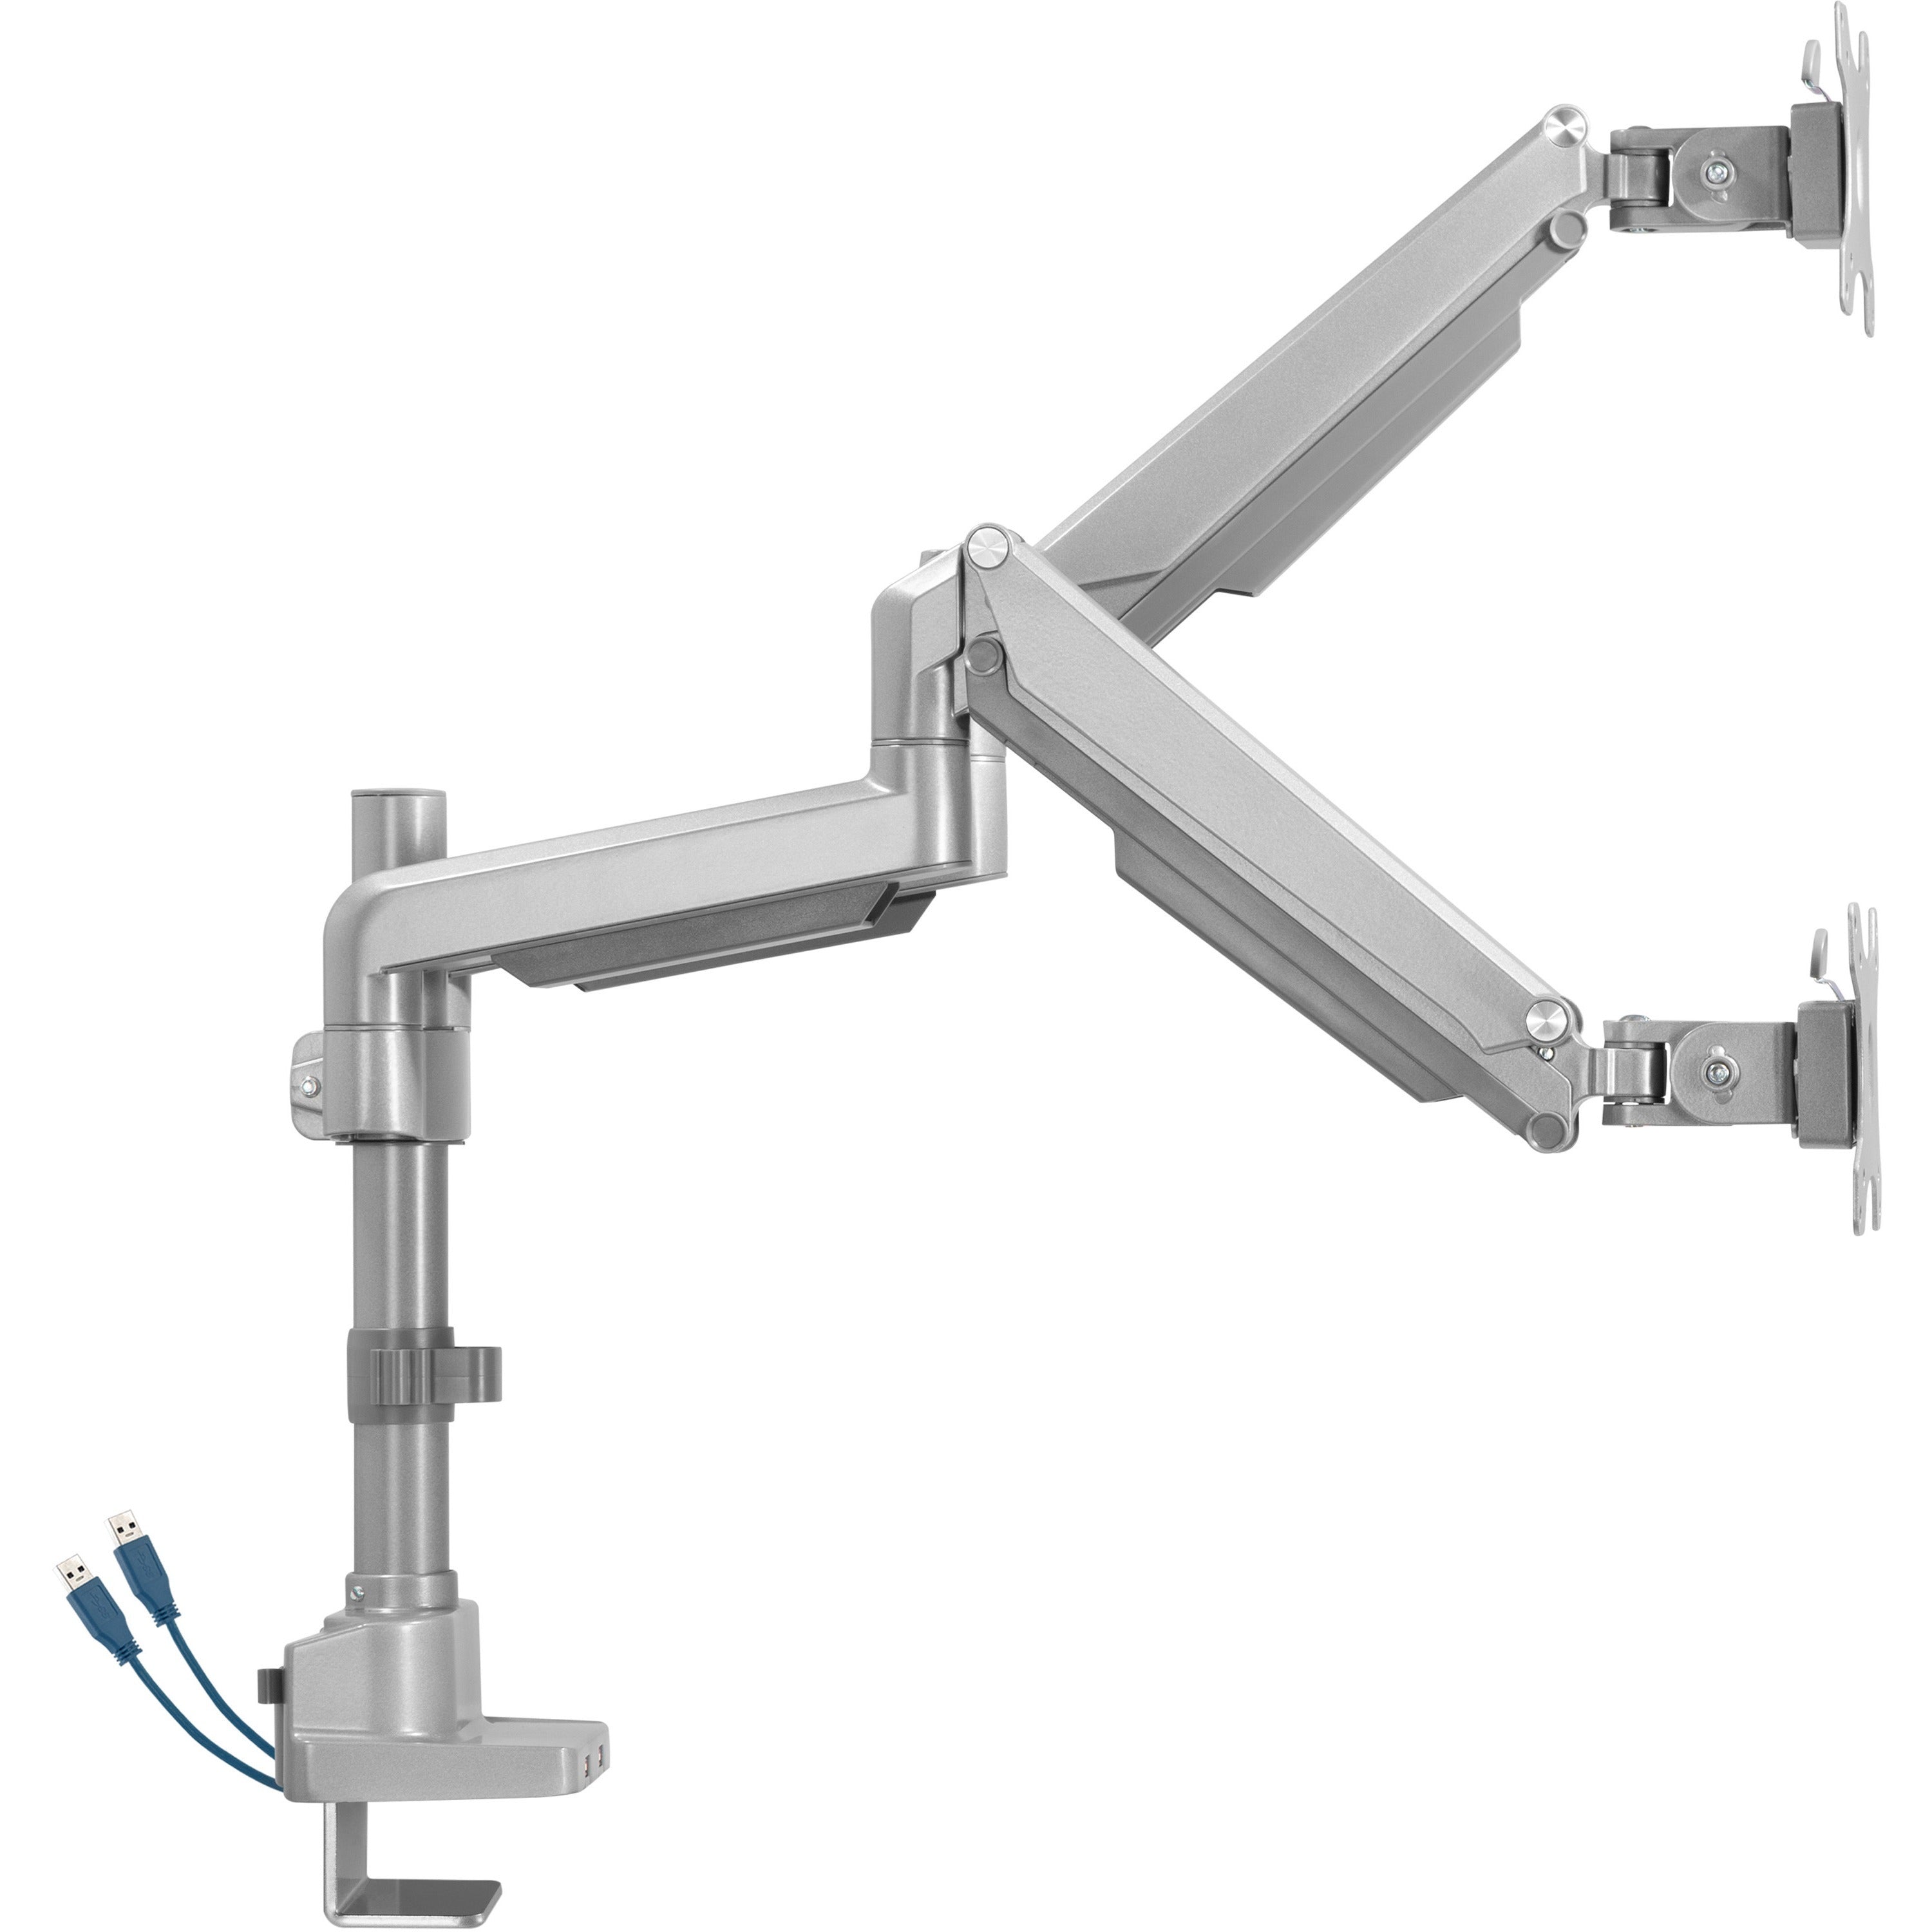 lorell-mounting-arm-for-monitor-gray-height-adjustable-2-displays-supported-1980-lb-load-capacity-75-x-75-100-x-100-1-each_llr99803 - 3